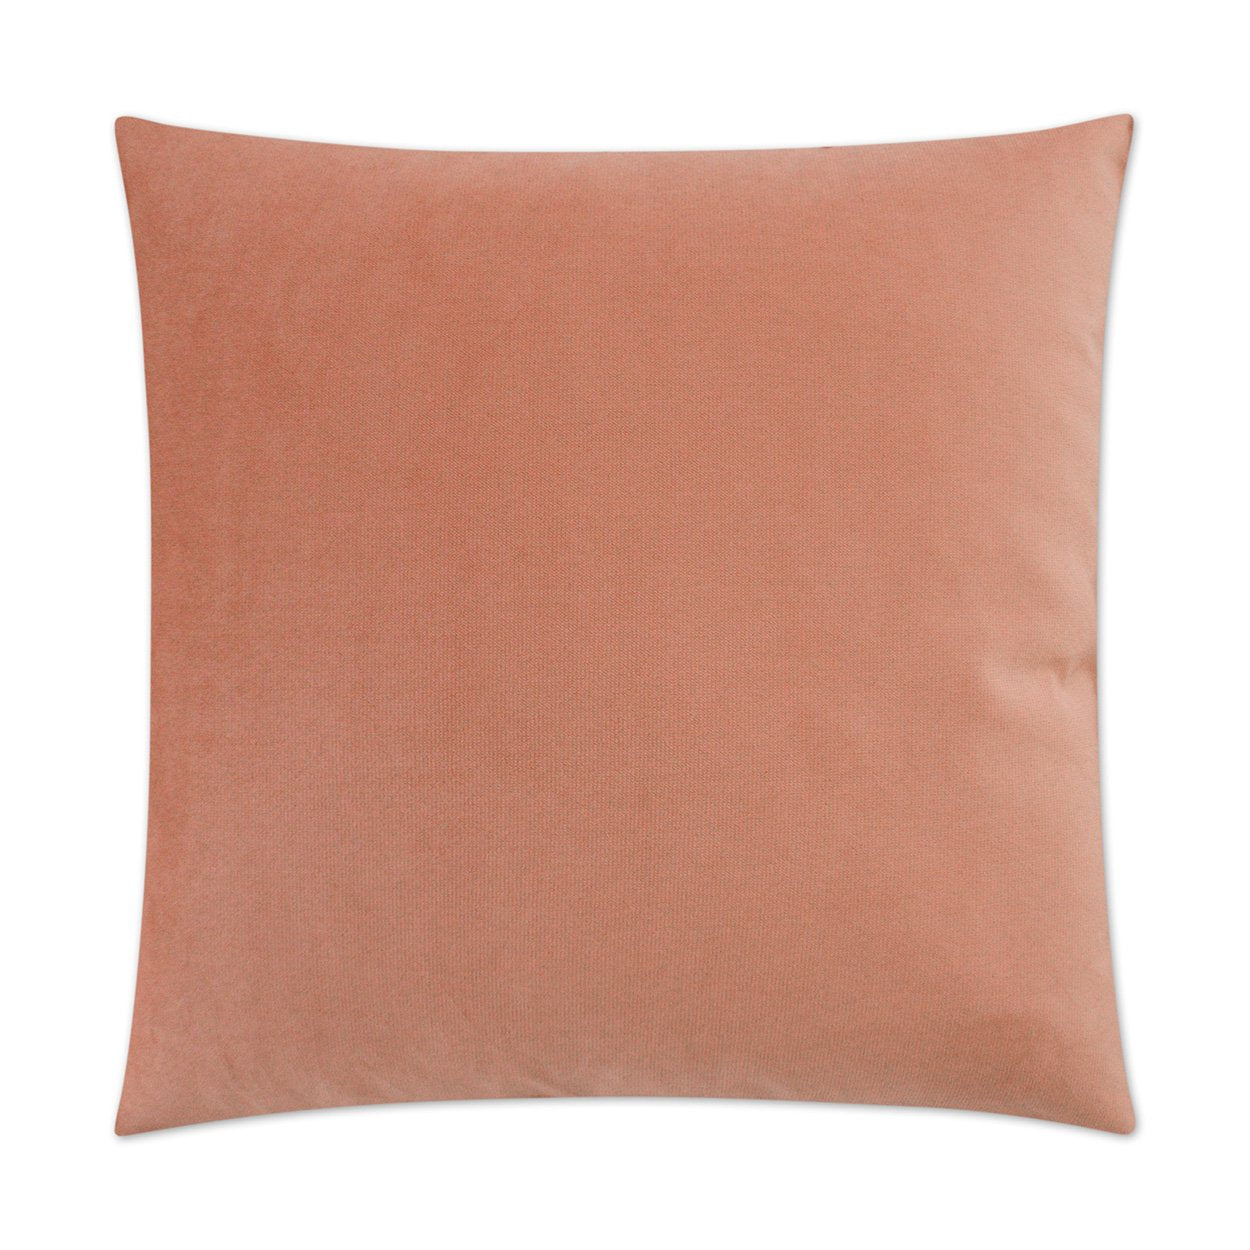 Luxury Pillow - 24” x 24” - Belvedere Blush; Blush color solid in a creamy smooth velvet fabric